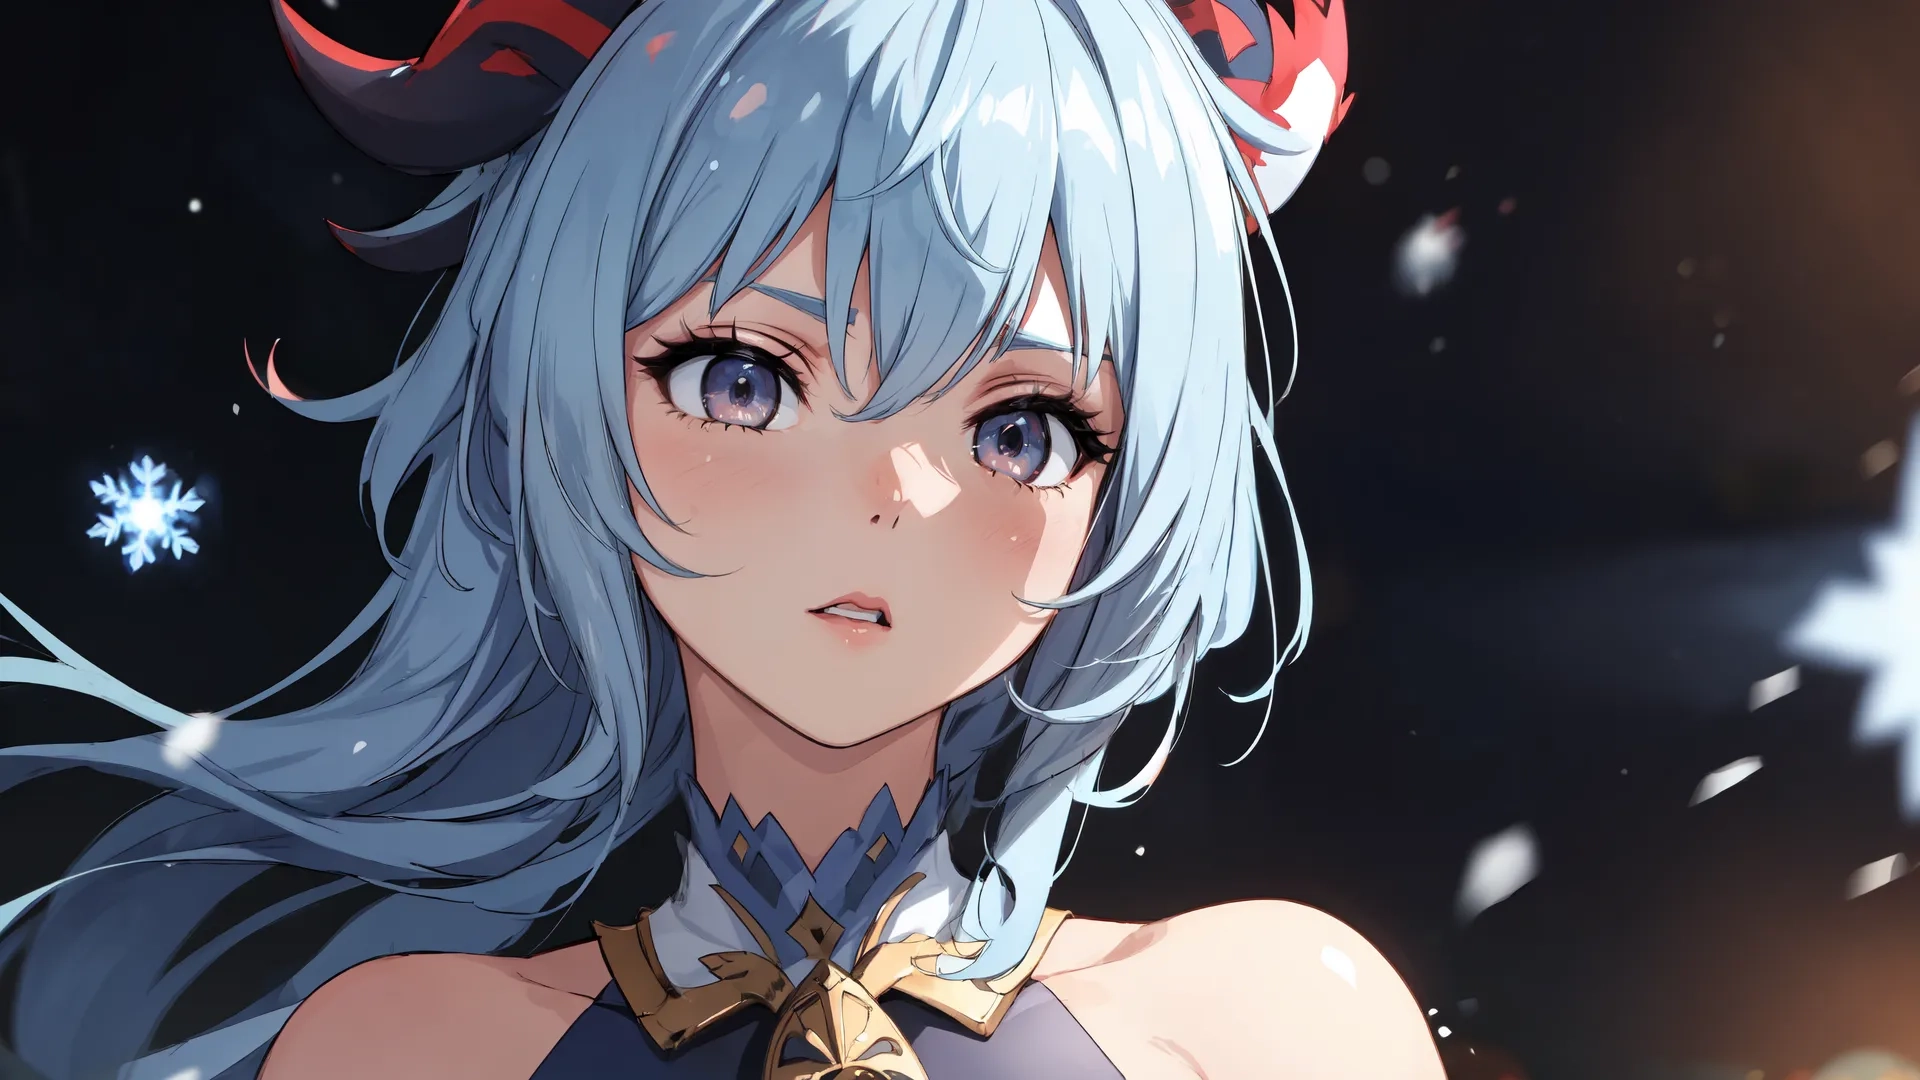 a person with long blue hair and a devil like headband is staring in a snowy sky background and snow flakes around them behind it
